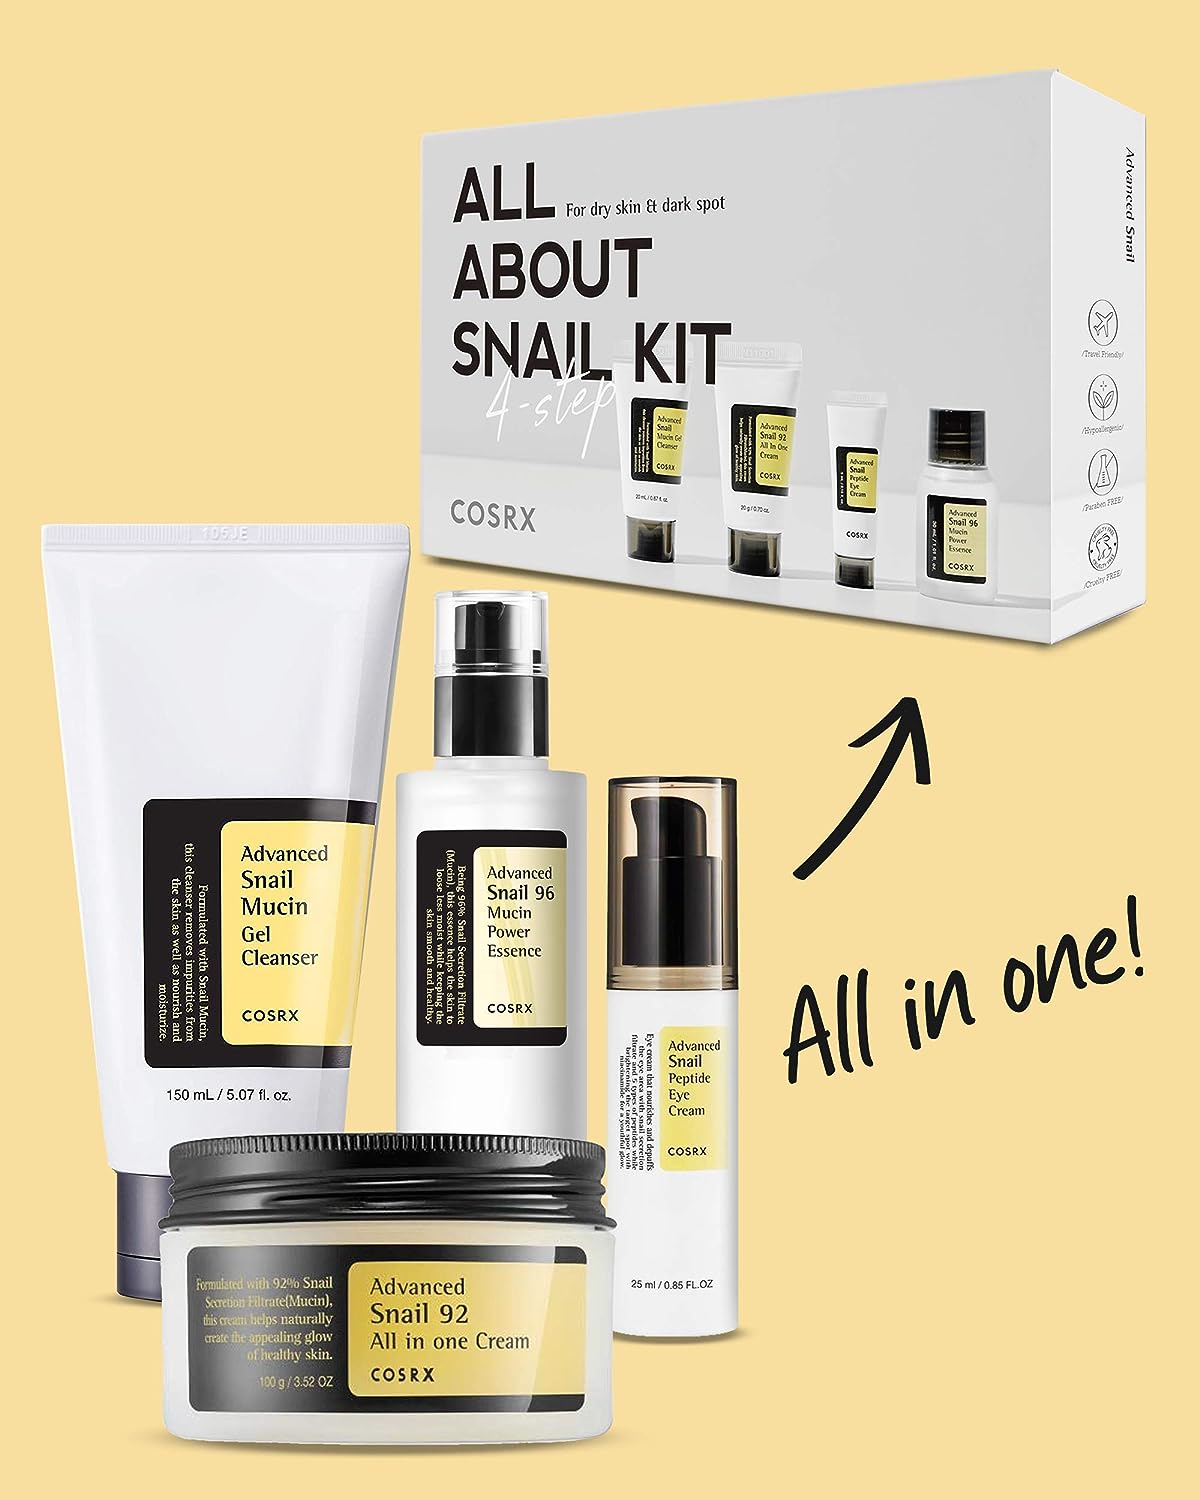 COSRX - ALL ABOUT SNAIL KIT 4-step